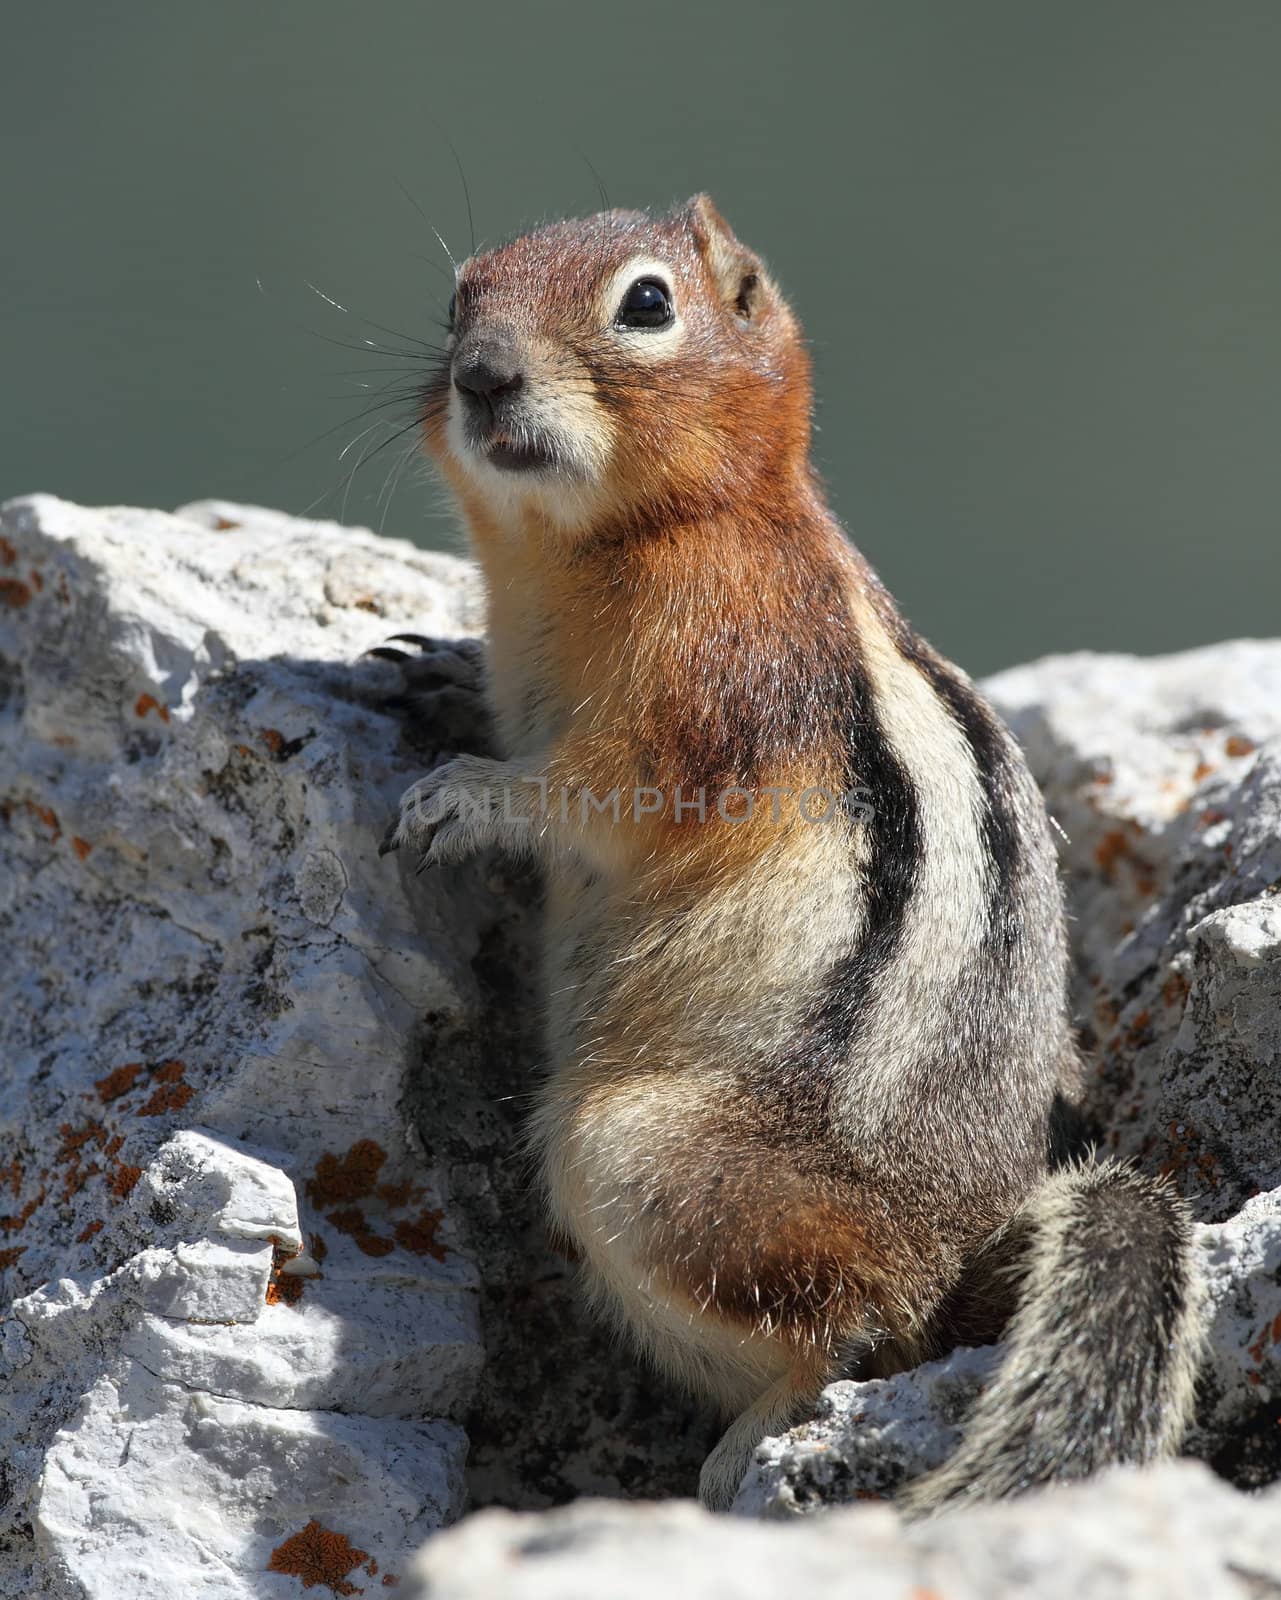 Golden-Mantled Ground Squirrel (Callospermophilus lateralis) by gonepaddling